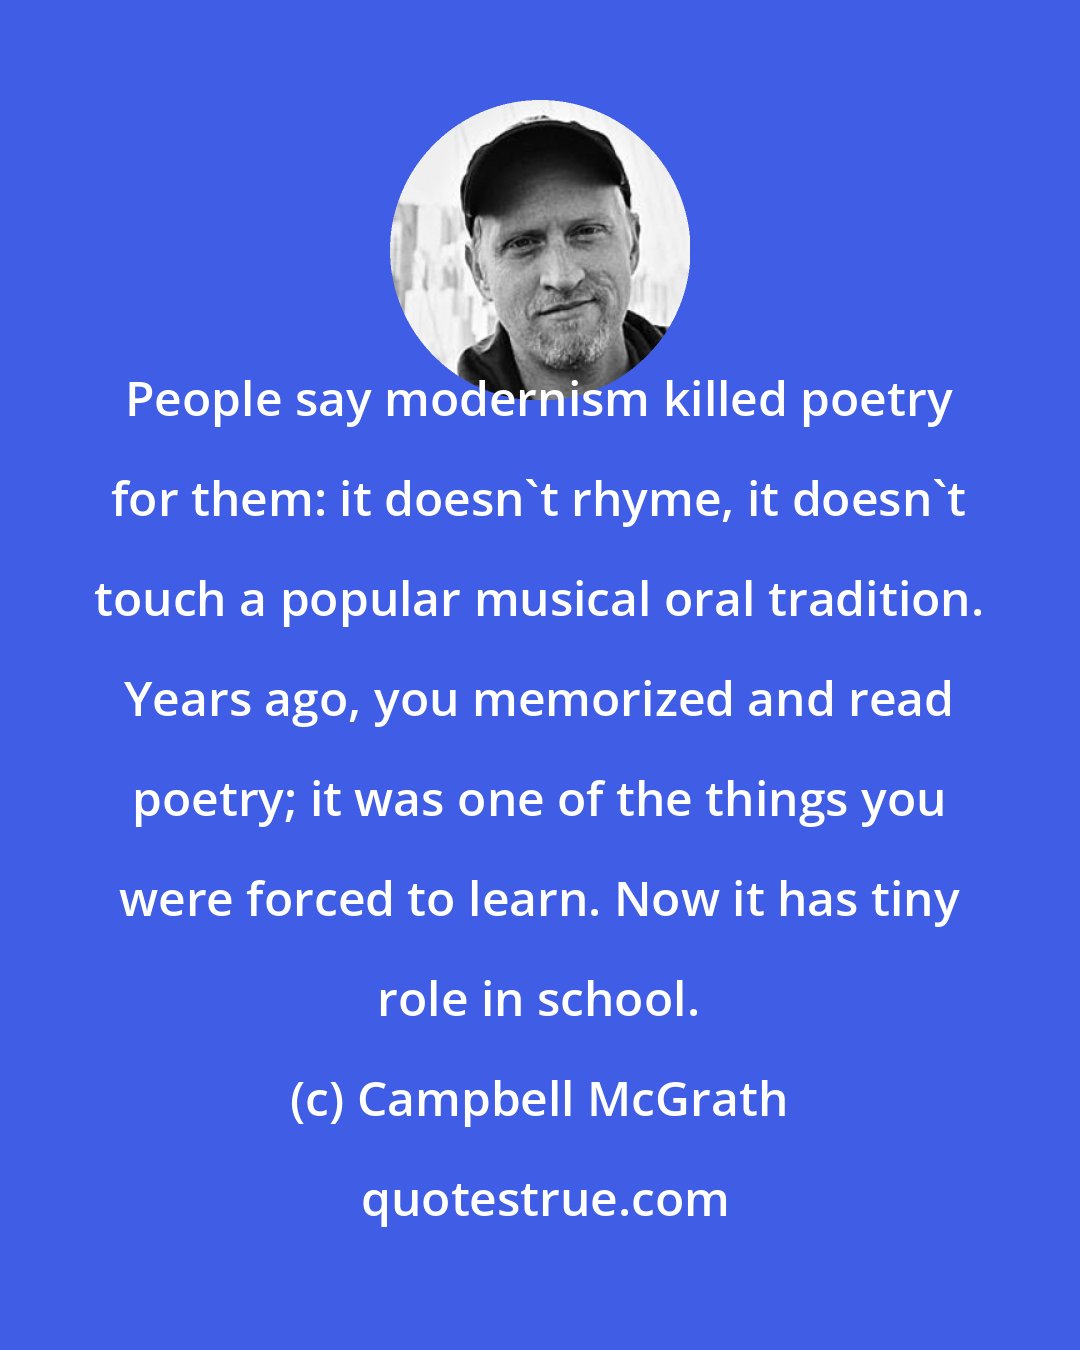 Campbell McGrath: People say modernism killed poetry for them: it doesn't rhyme, it doesn't touch a popular musical oral tradition. Years ago, you memorized and read poetry; it was one of the things you were forced to learn. Now it has tiny role in school.